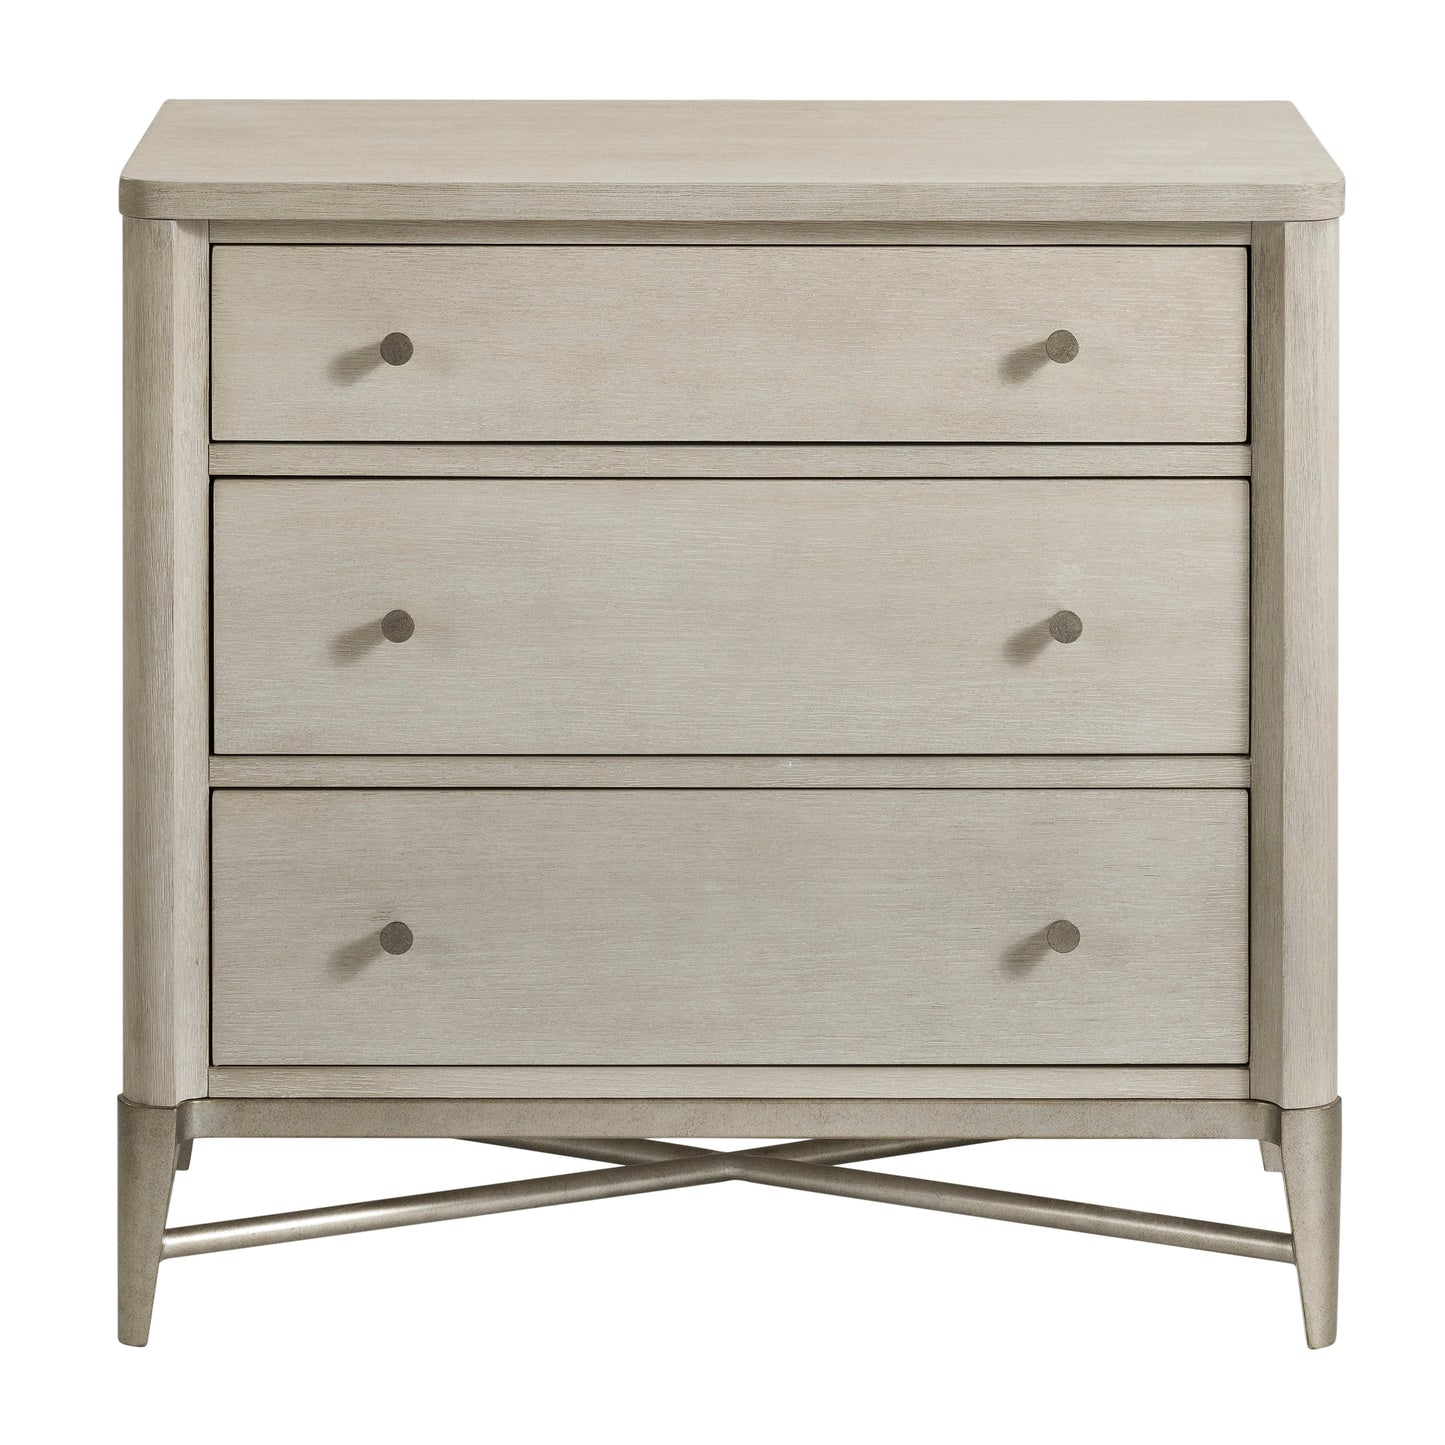 Mantalia Solid Wood 3-Drawer Nightstand with Metal Frame, Champagne